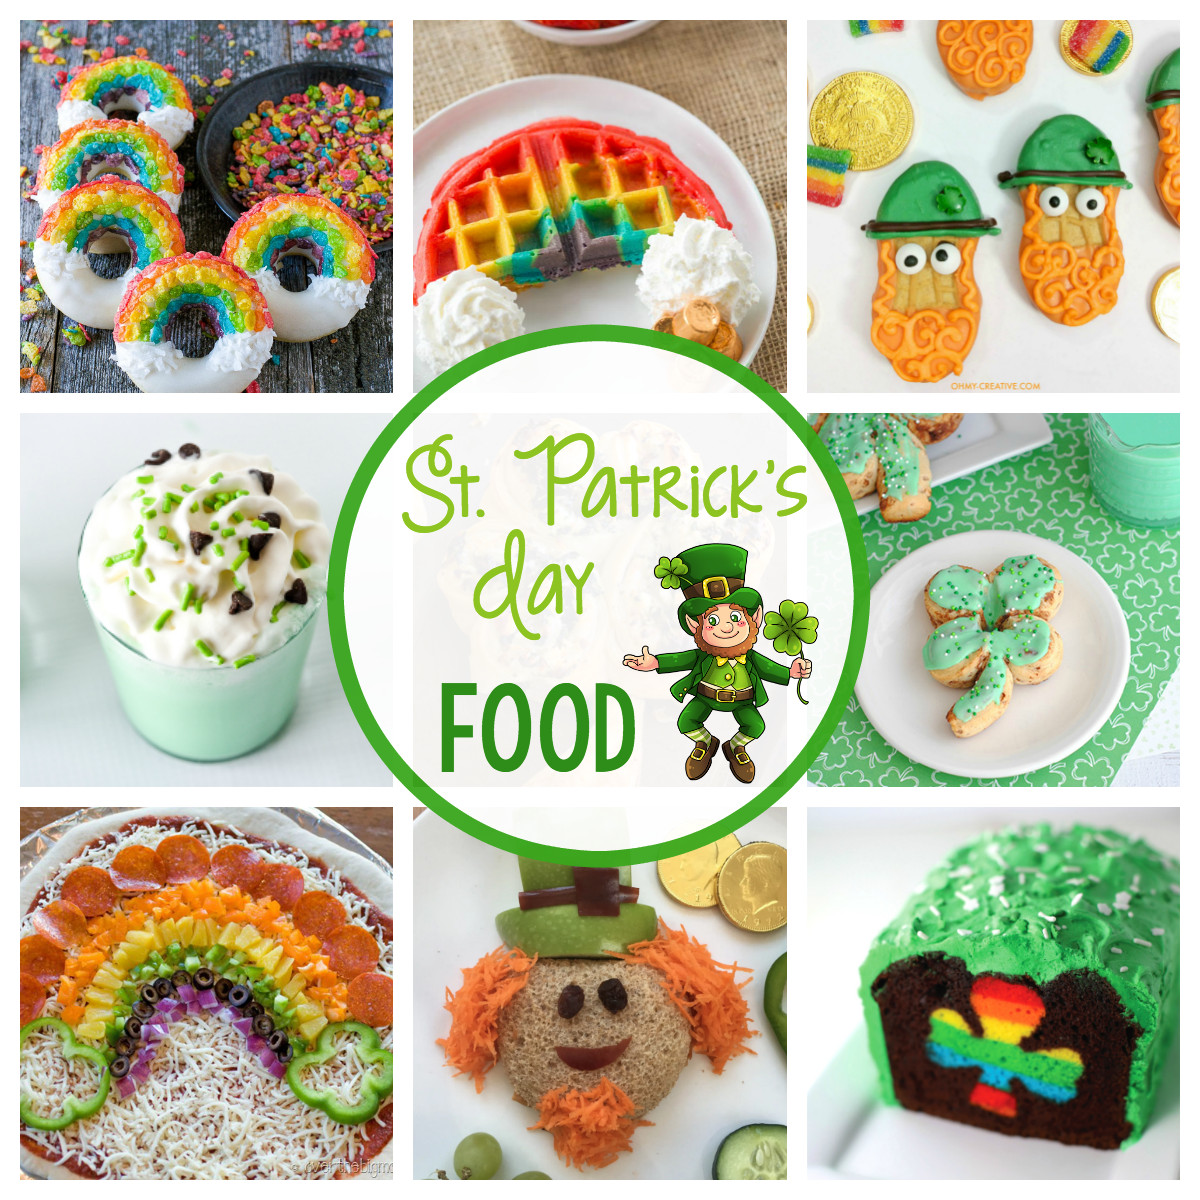 St Patrick's Day Food Recipes
 17 St Patrick s Day Food Ideas for Kids – Fun Squared